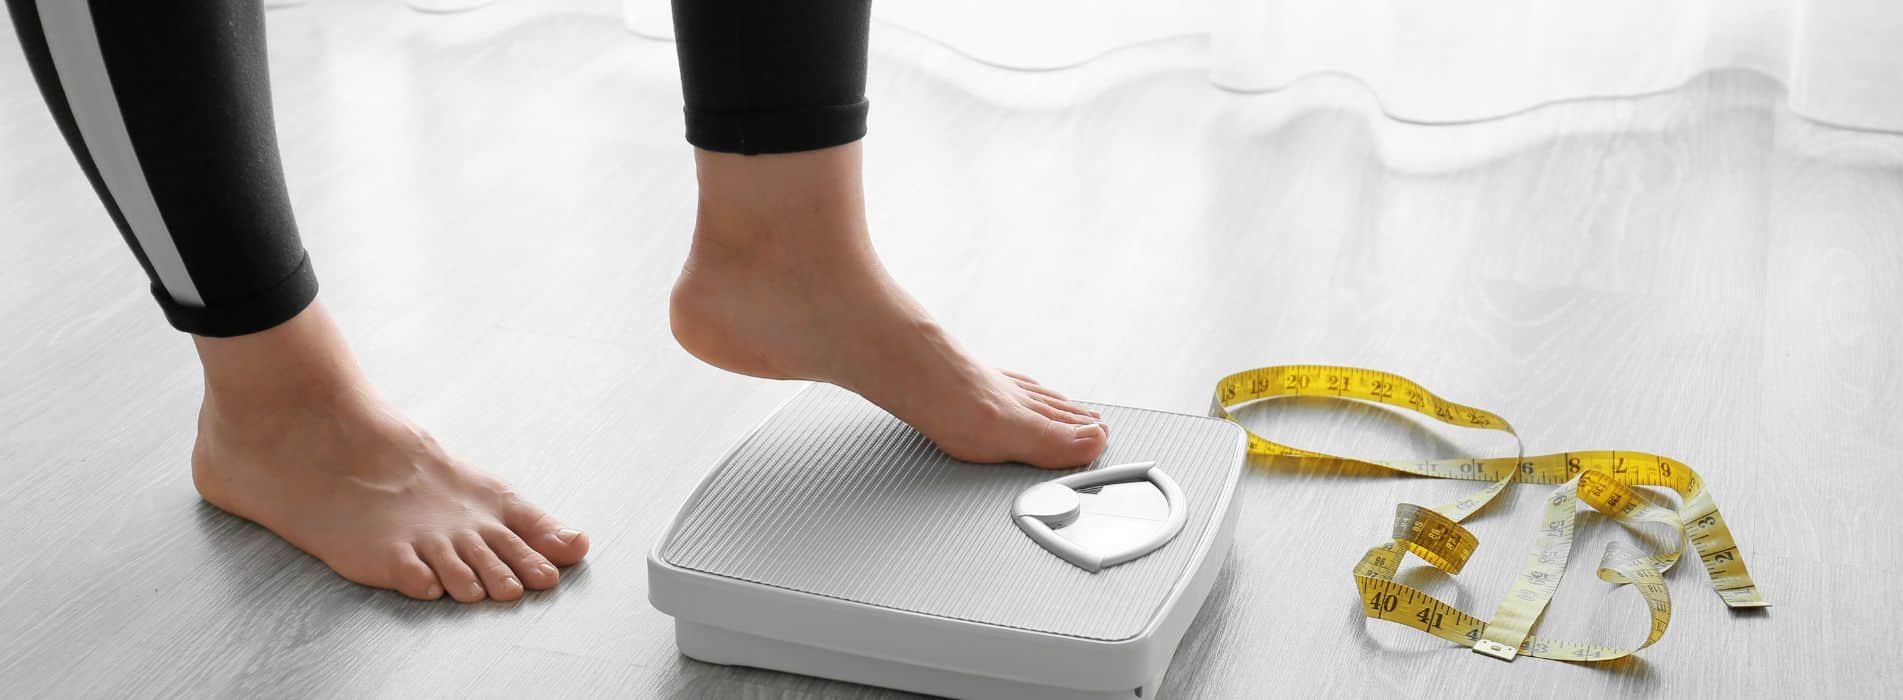 have a scale at home